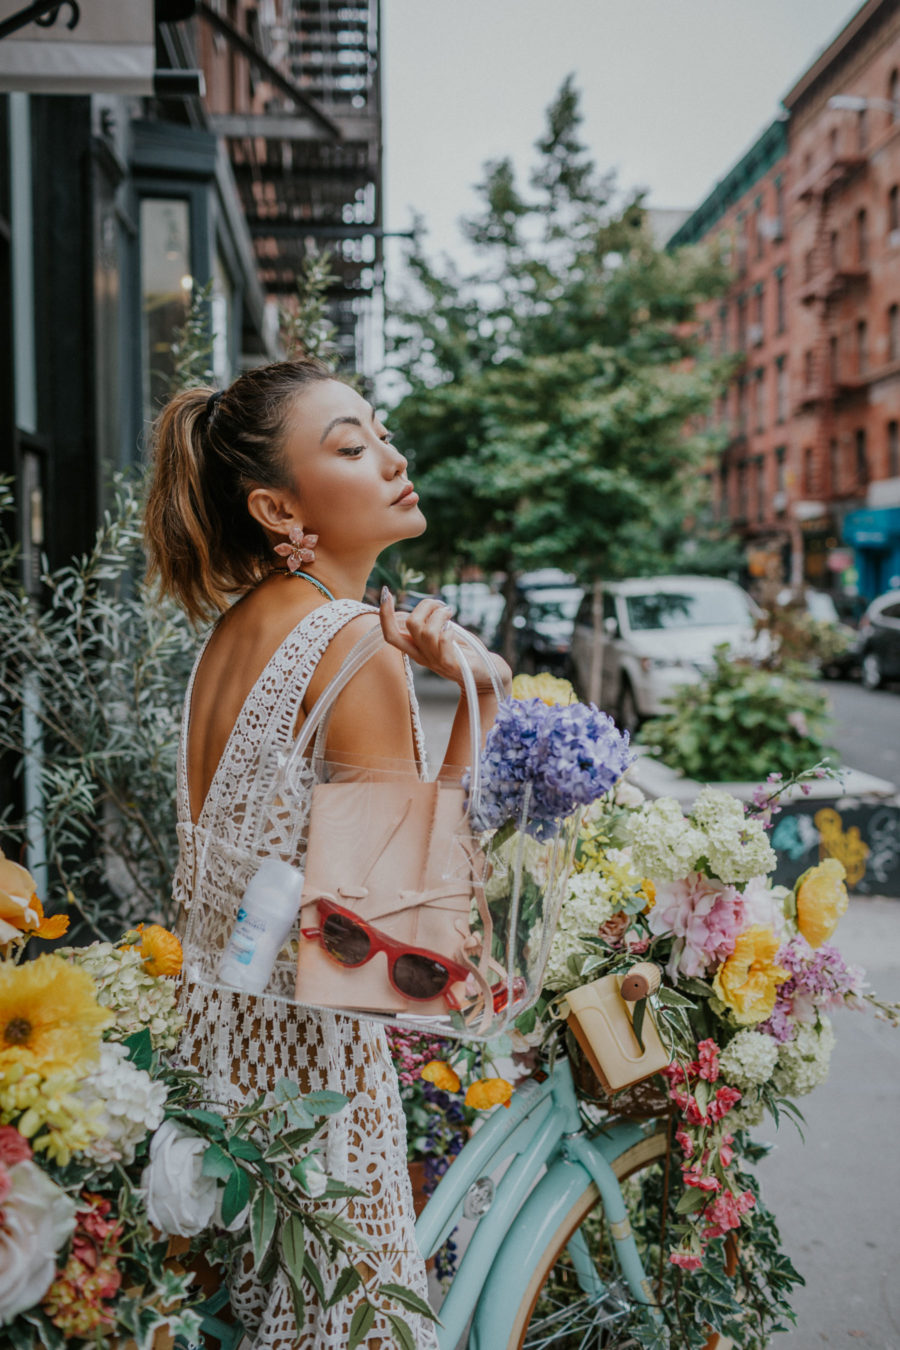 My Best Tips for Feeling Confident with Secret Invisible Shield Deodorant // White Lace Dress, Transparent Tote, Clear Handbag, Summer Style, Top NYC Blogger // Notjessfashion.com